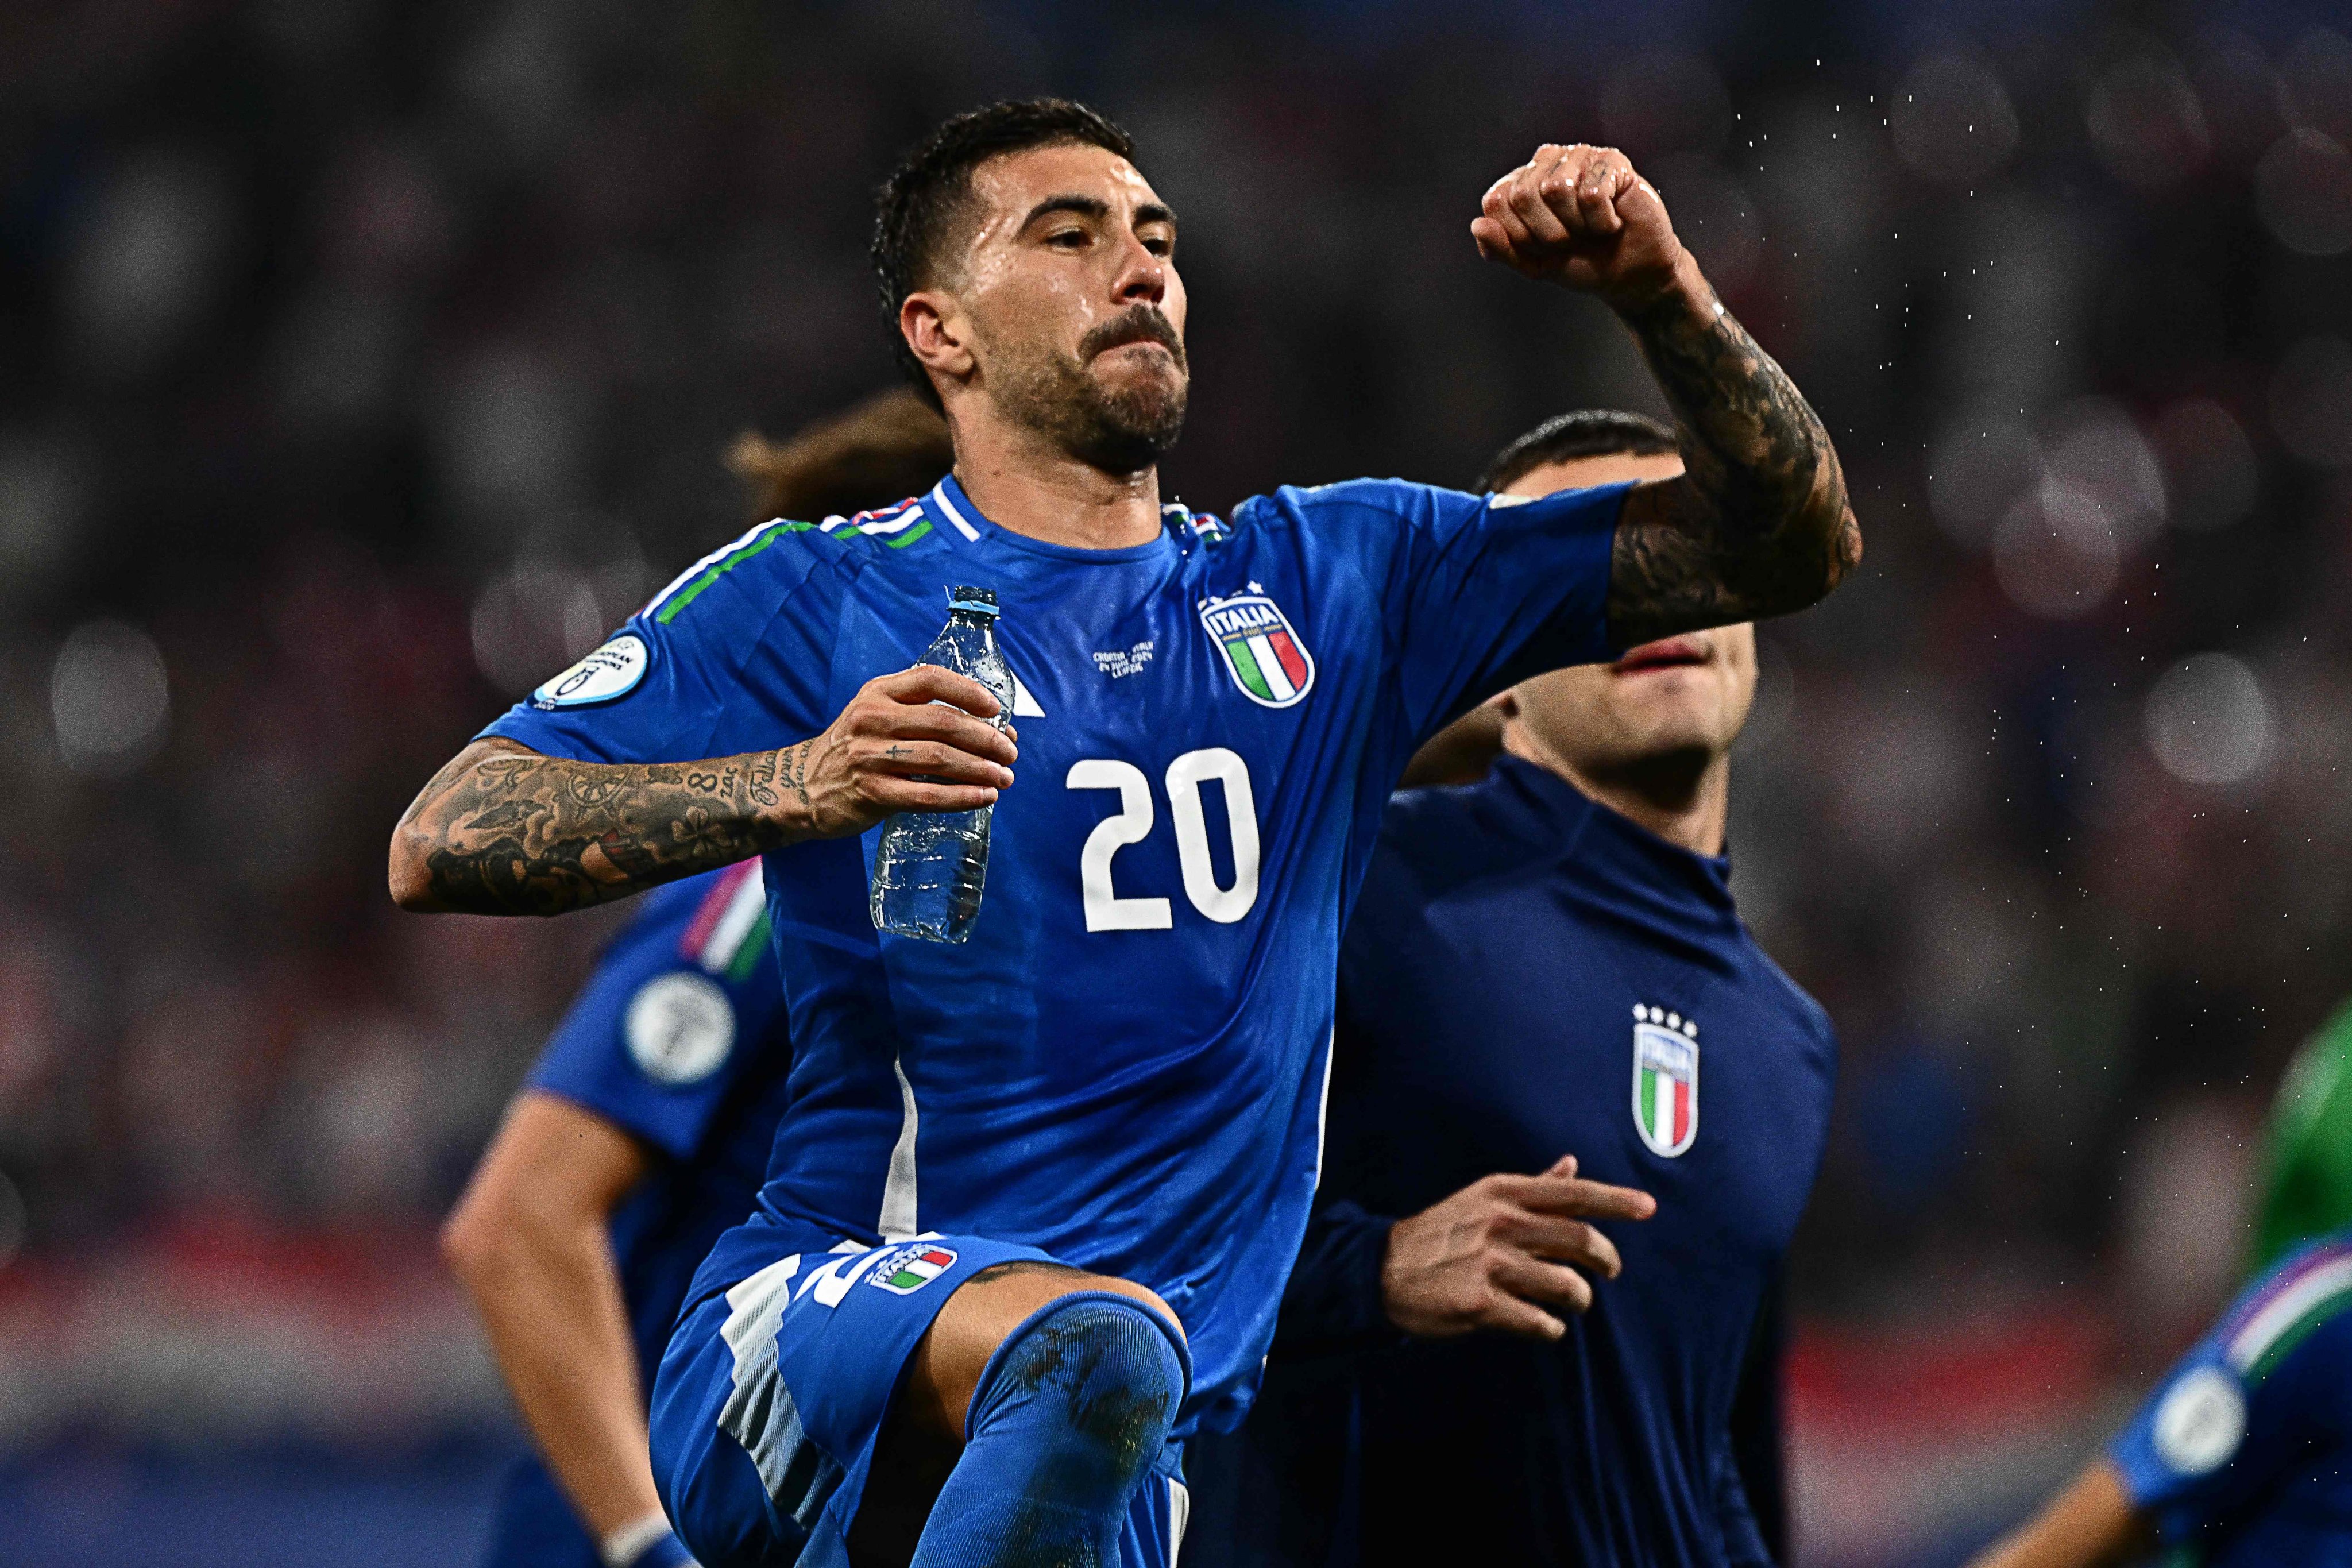 Italy forward Mattia Zaccagni is jubilant at full-time in Leipzig after his crucial late goal. Photo: AFP